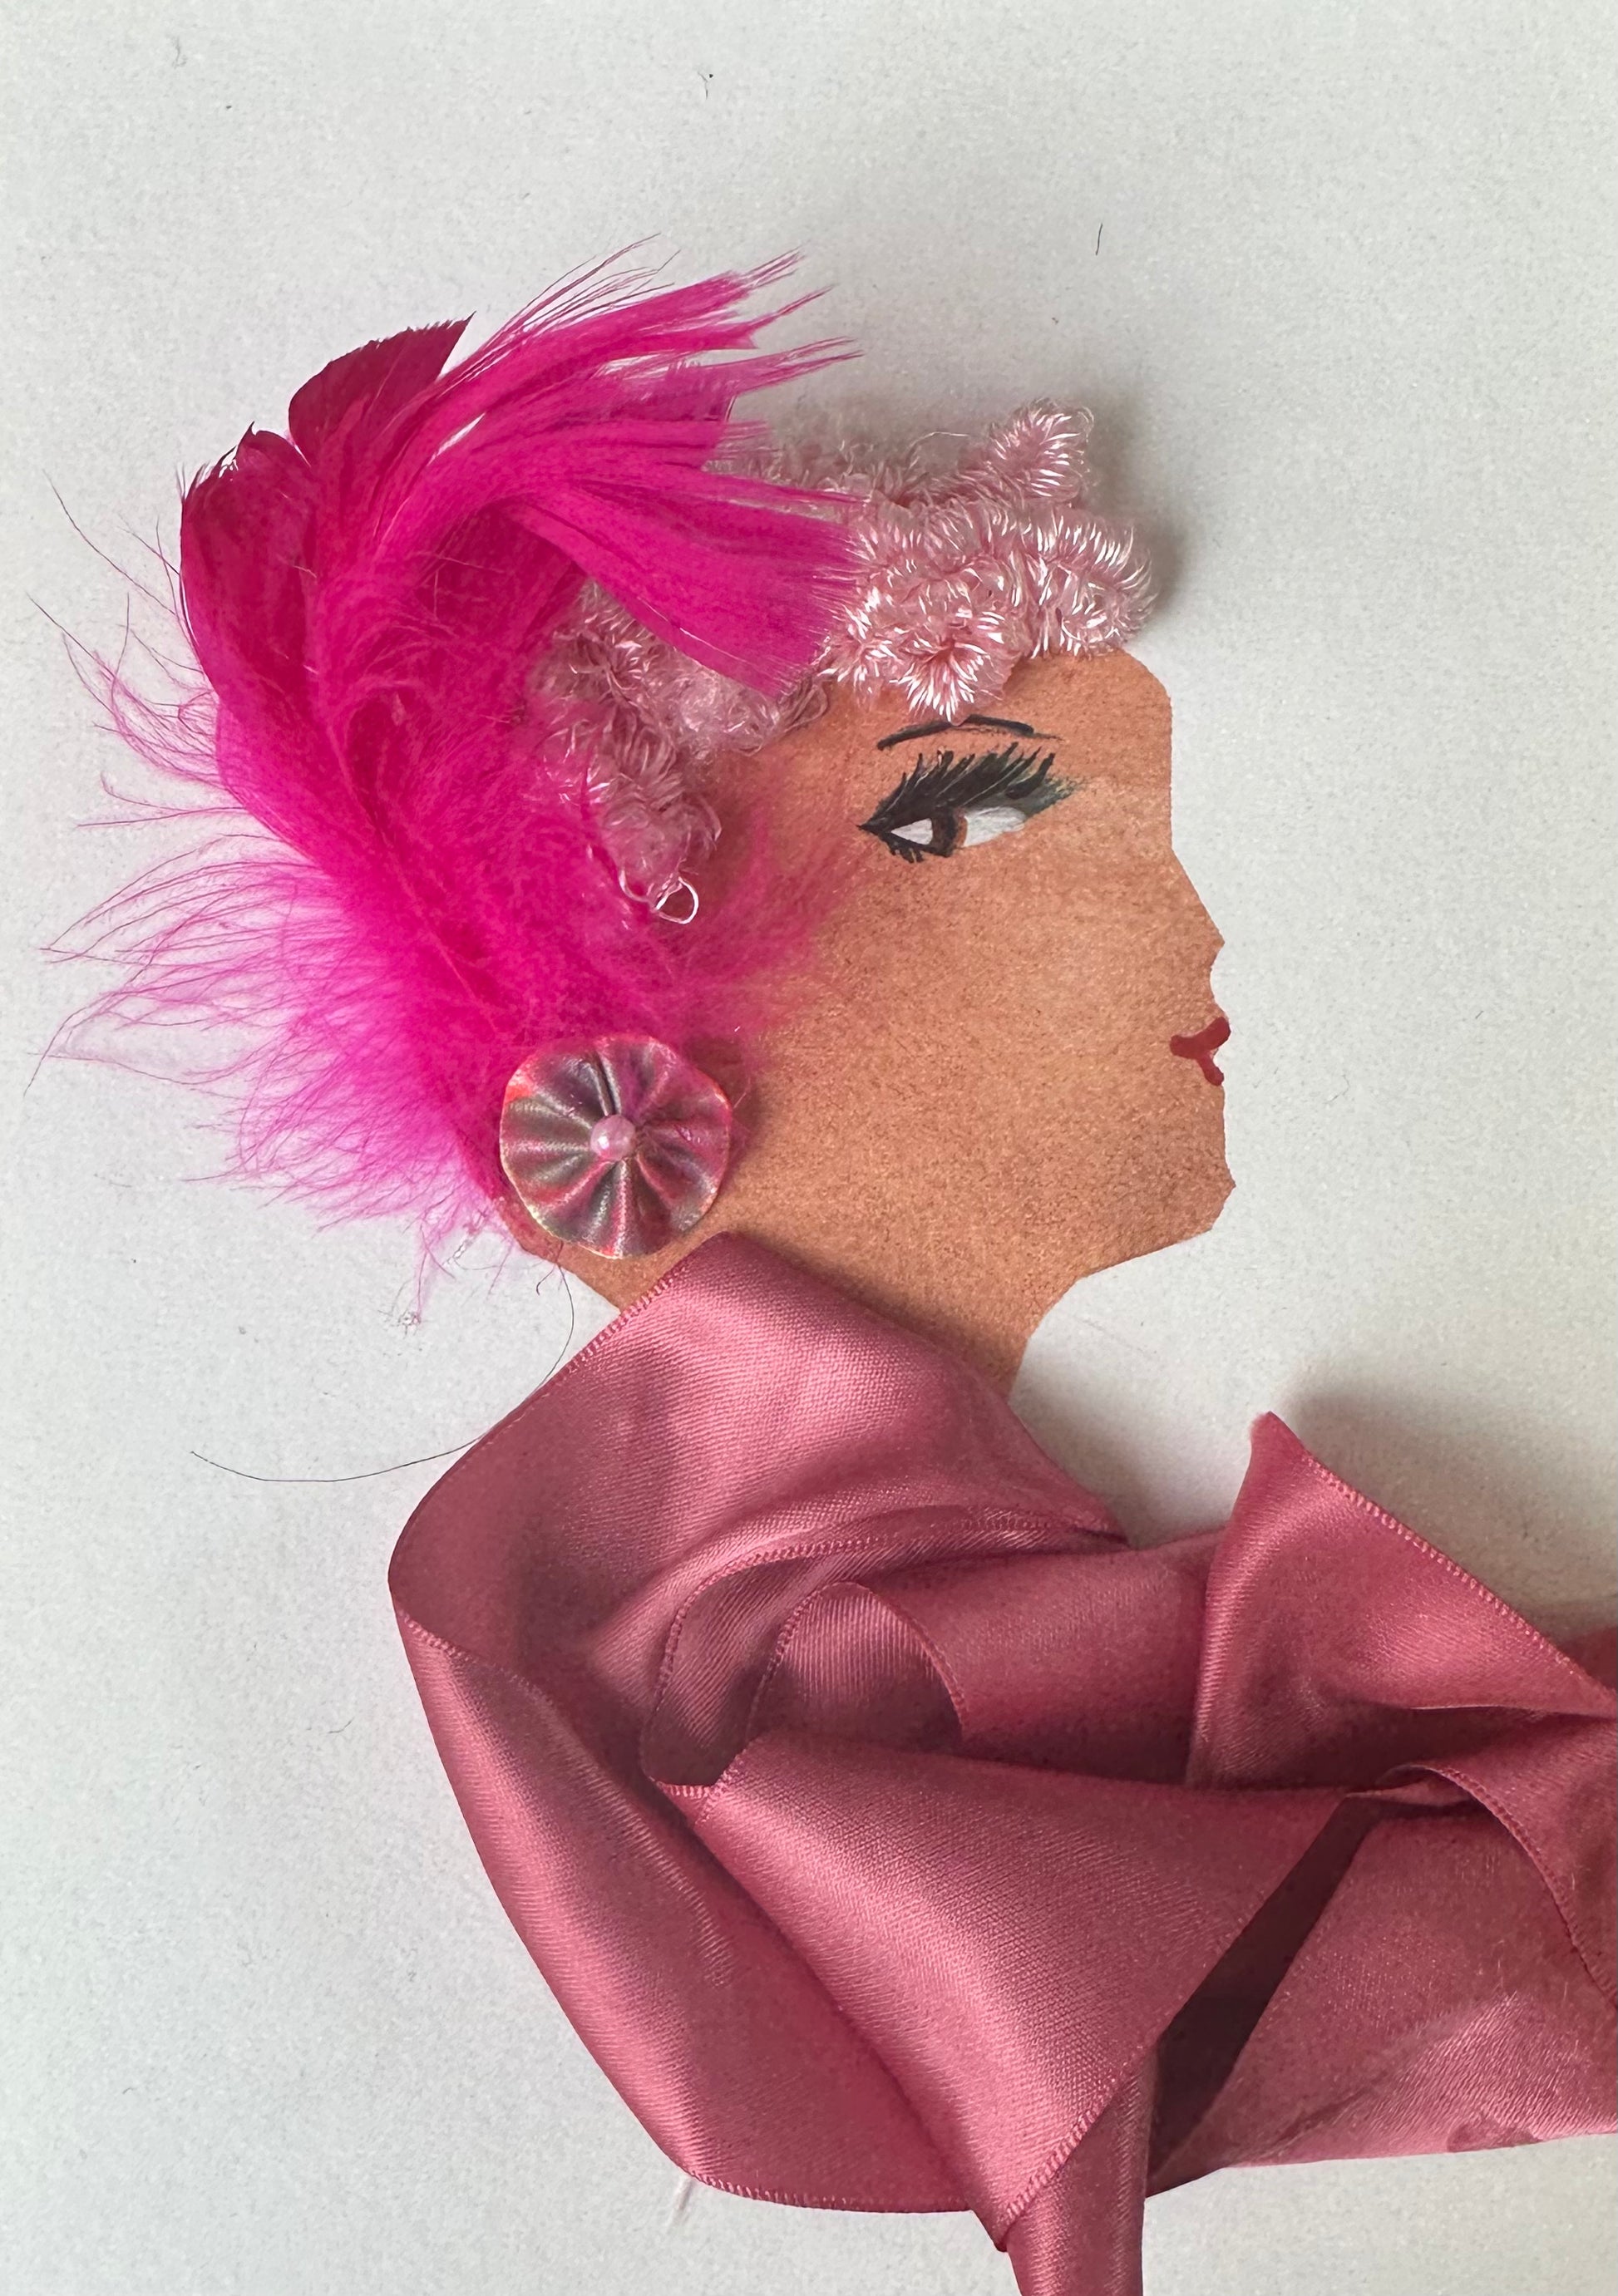 I designed this handmade card of a woman dressed in a pink ribbon blouse. She had ballet pink hair that is pinned back with an electric pink flower. The outfit is completed with a flower shaped earring with a pearl-like center.